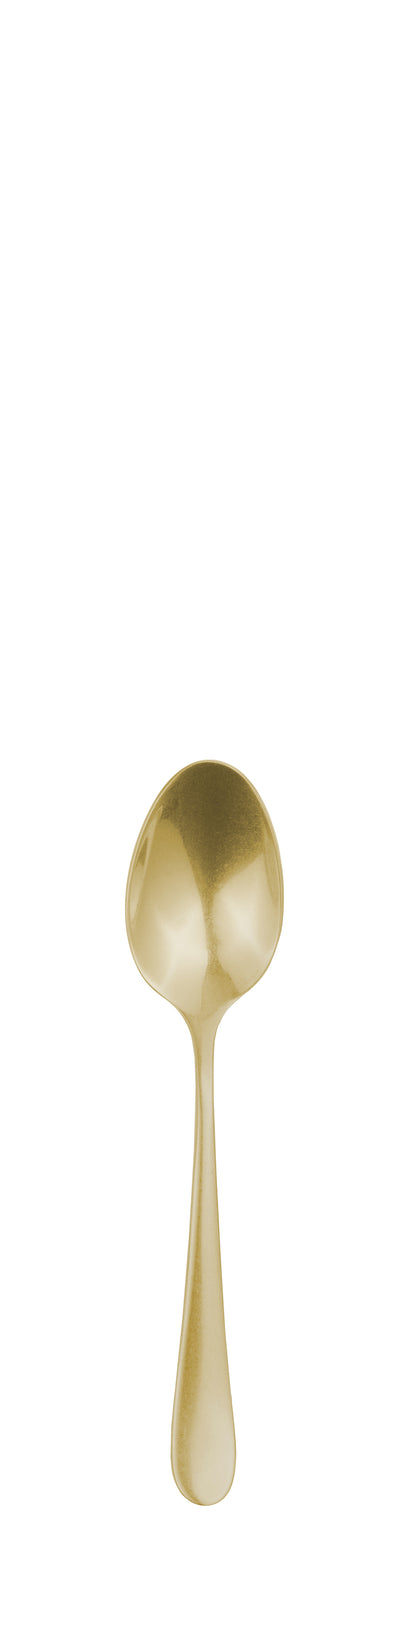 Espresso spoon SIGNUM PVD pale gold stonewashed 108mm